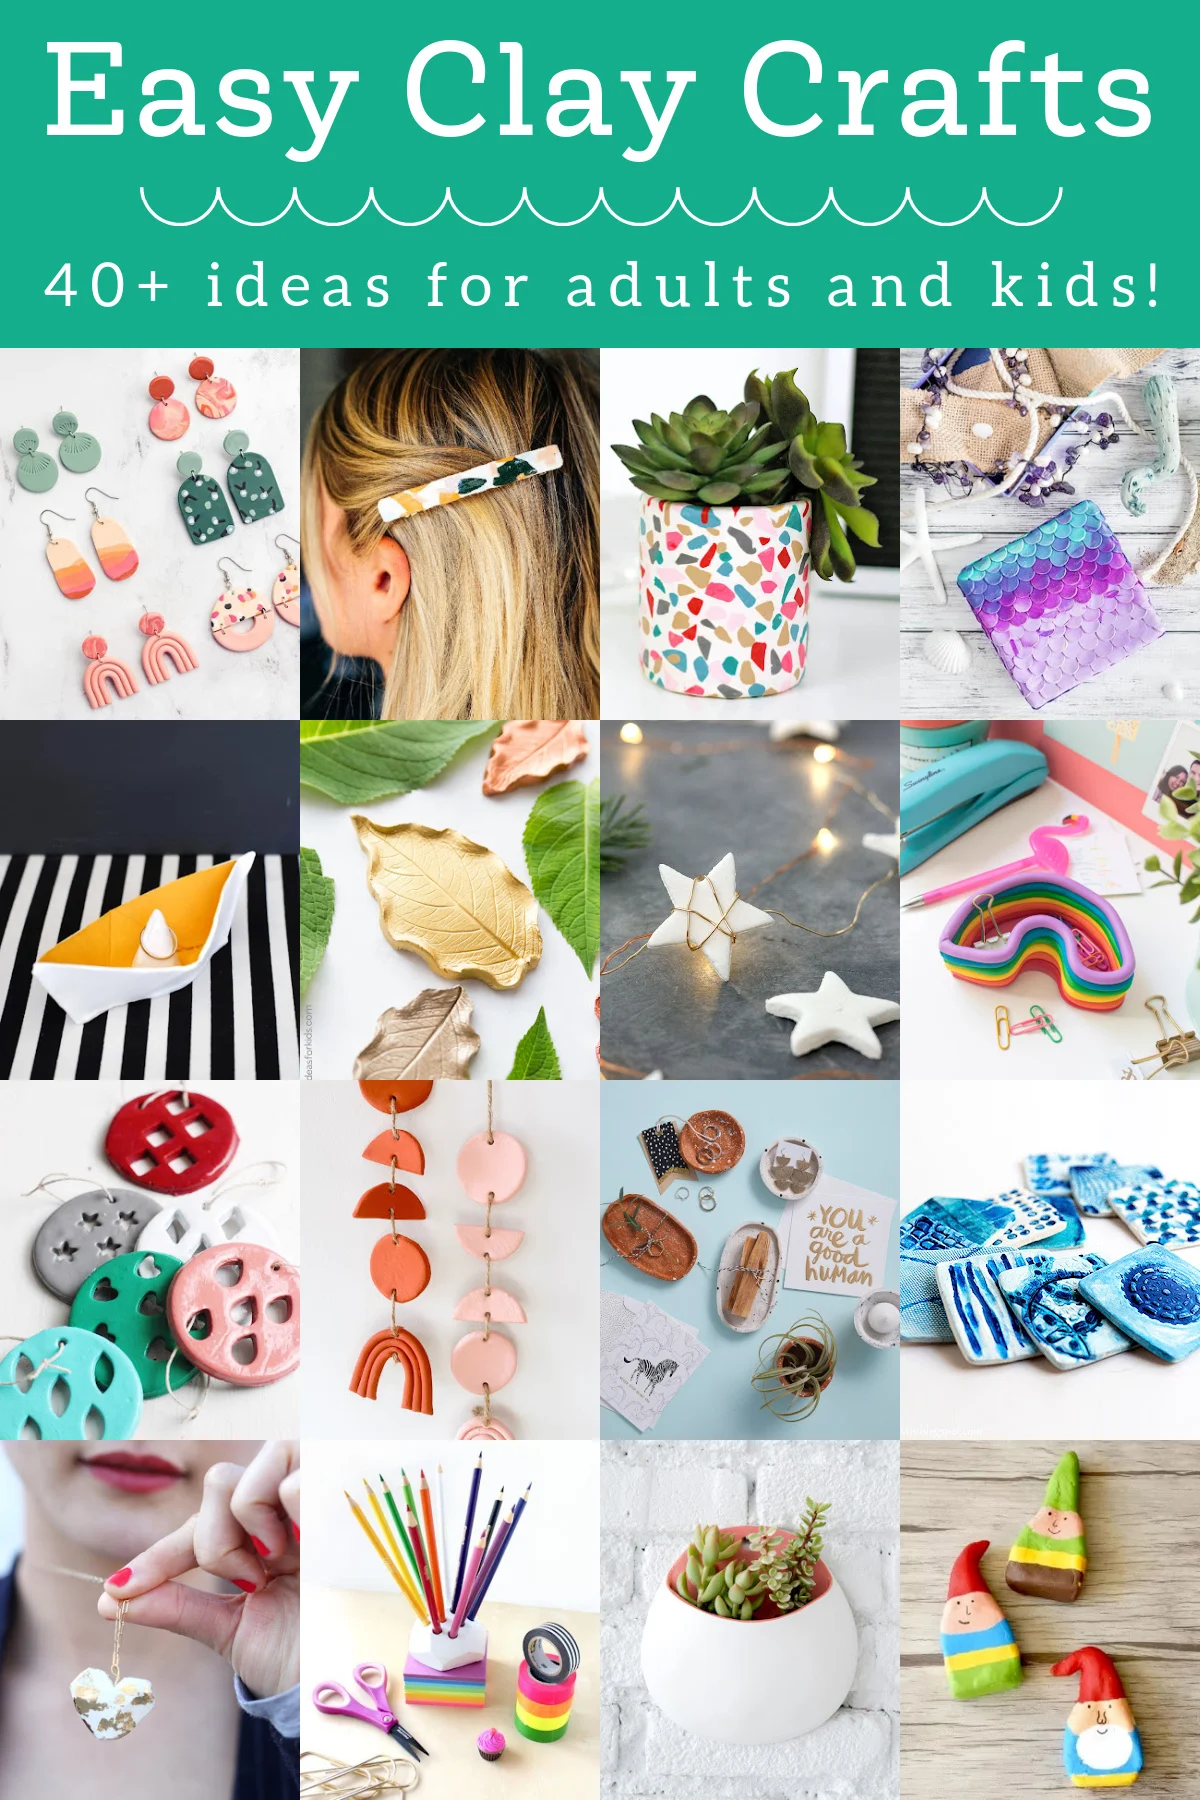 25 Top and Easy-to-do DIY Clay Crafts for Kids & Adults